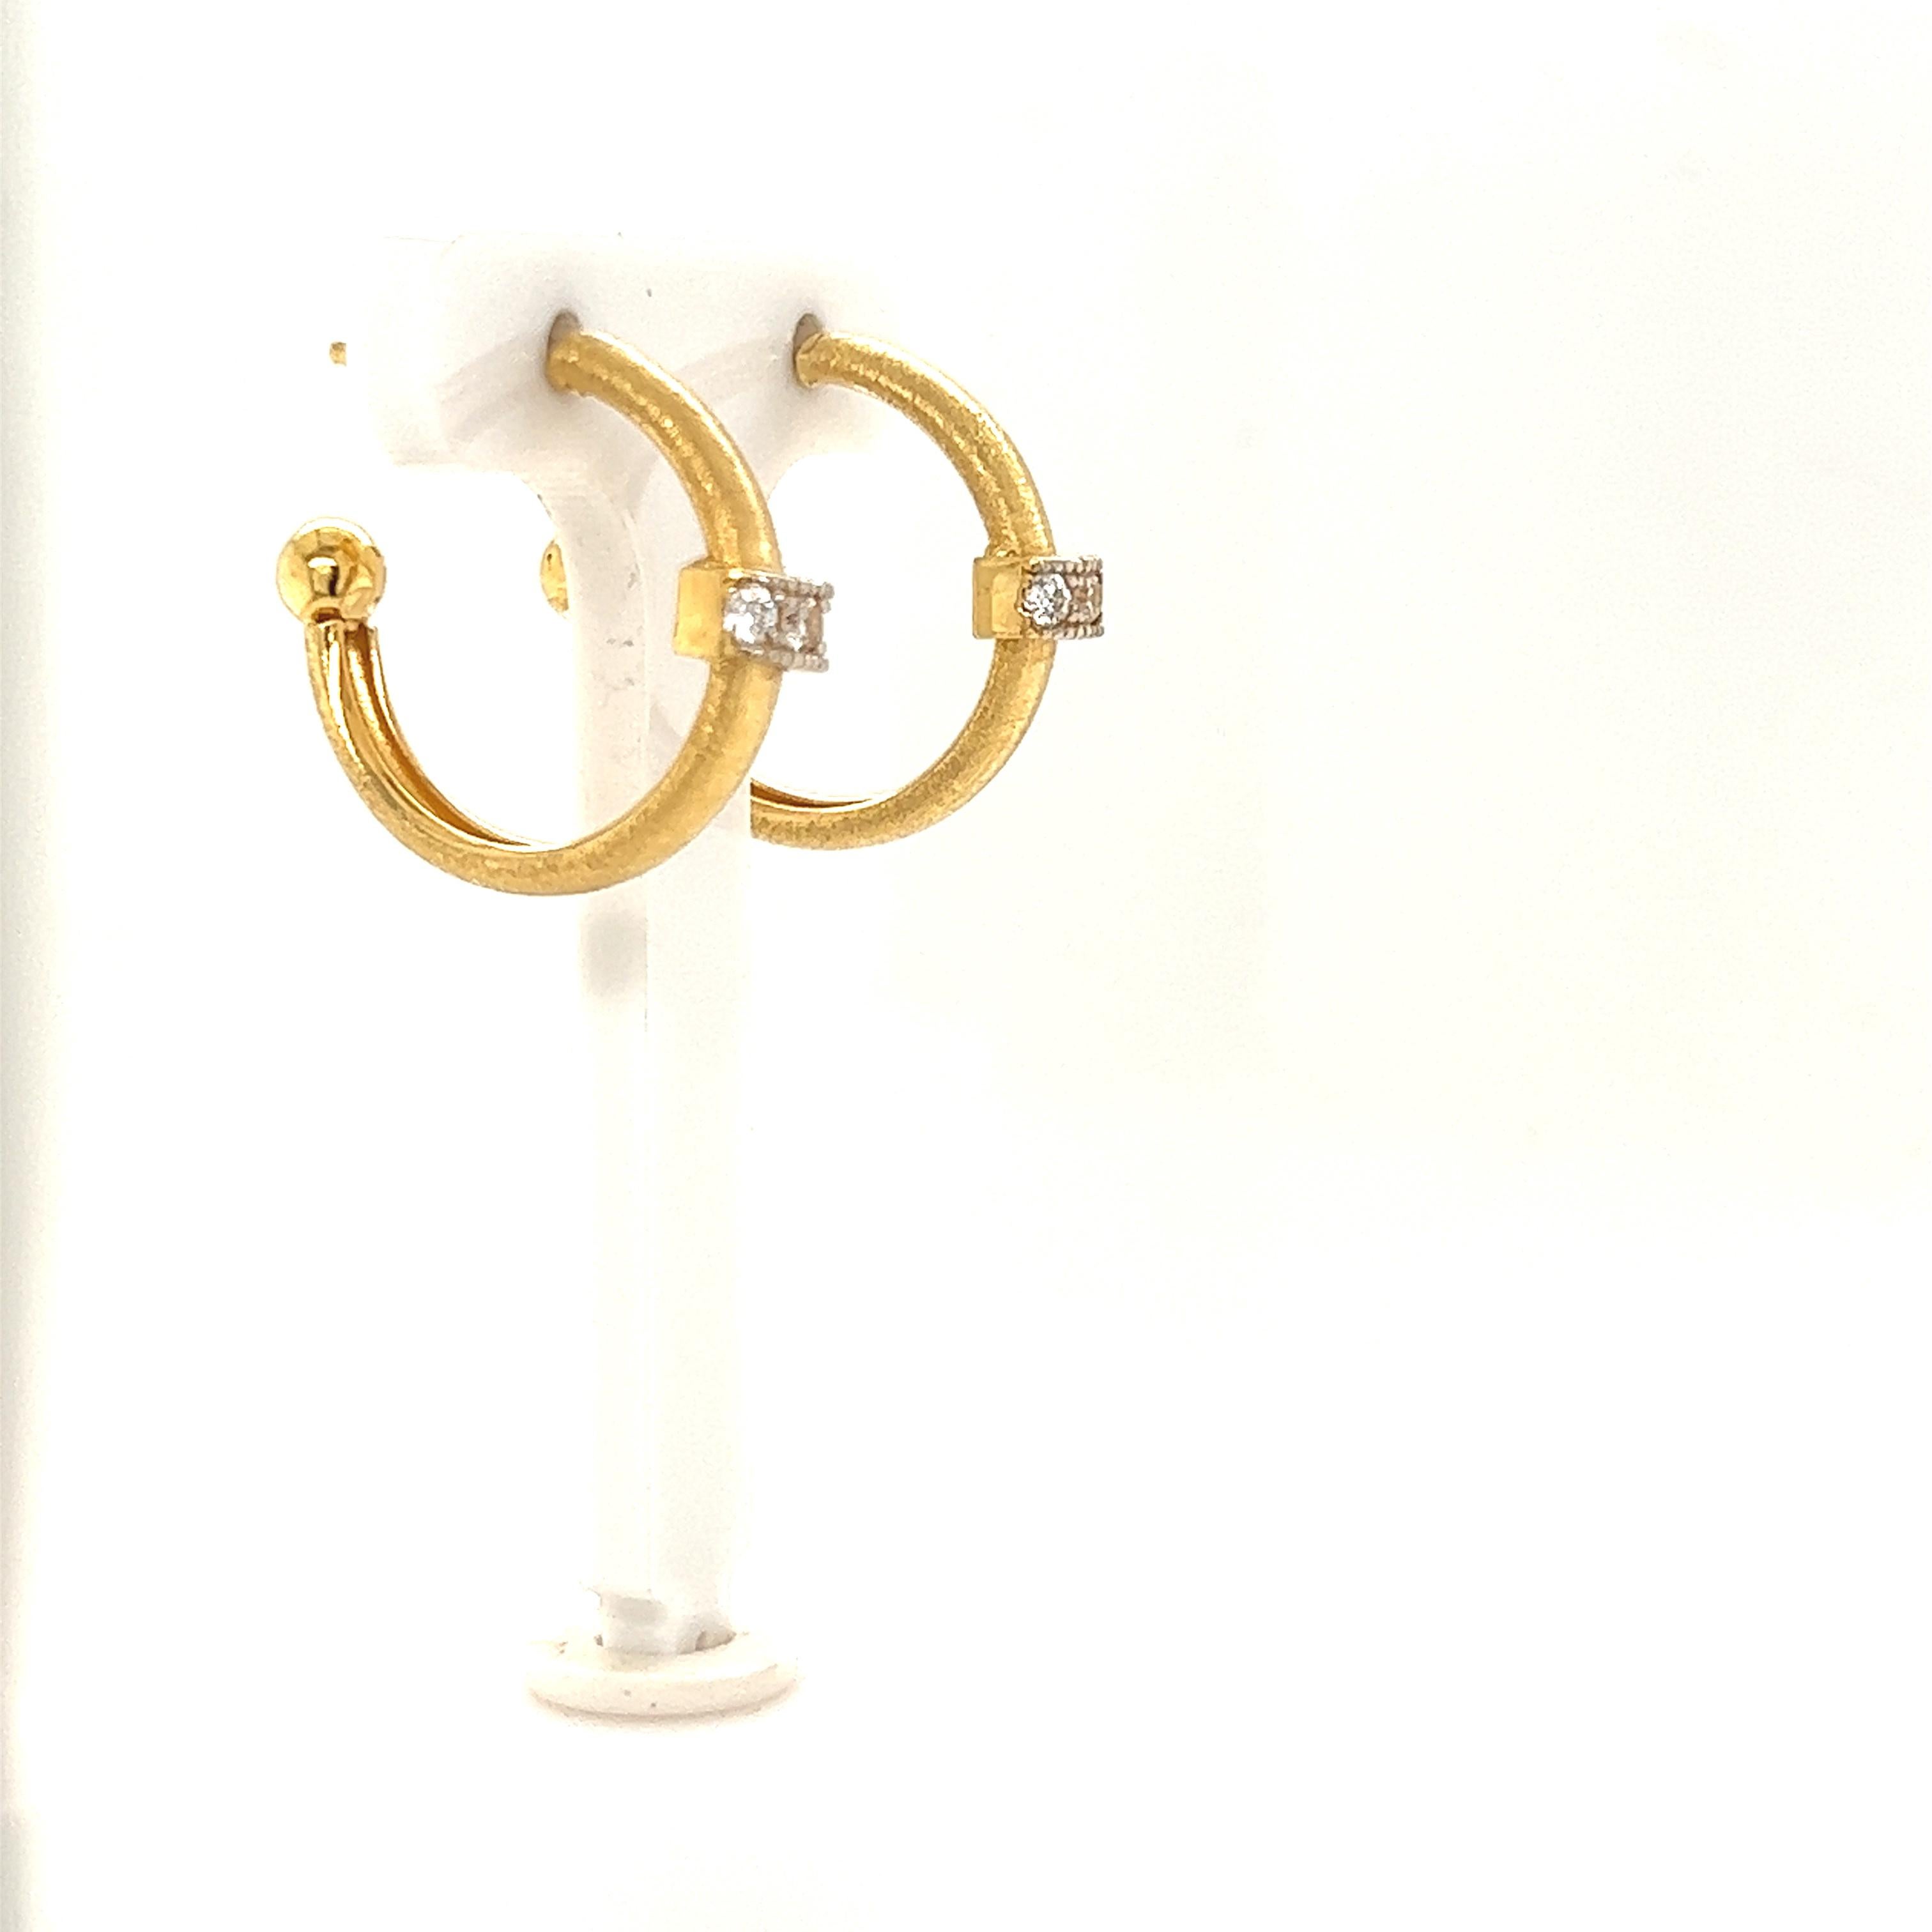 14 Karat Yellow Gold Matte-Finished Hoop Earrings, Accented with 0.10 Carats of Pave Set Diamonds.
